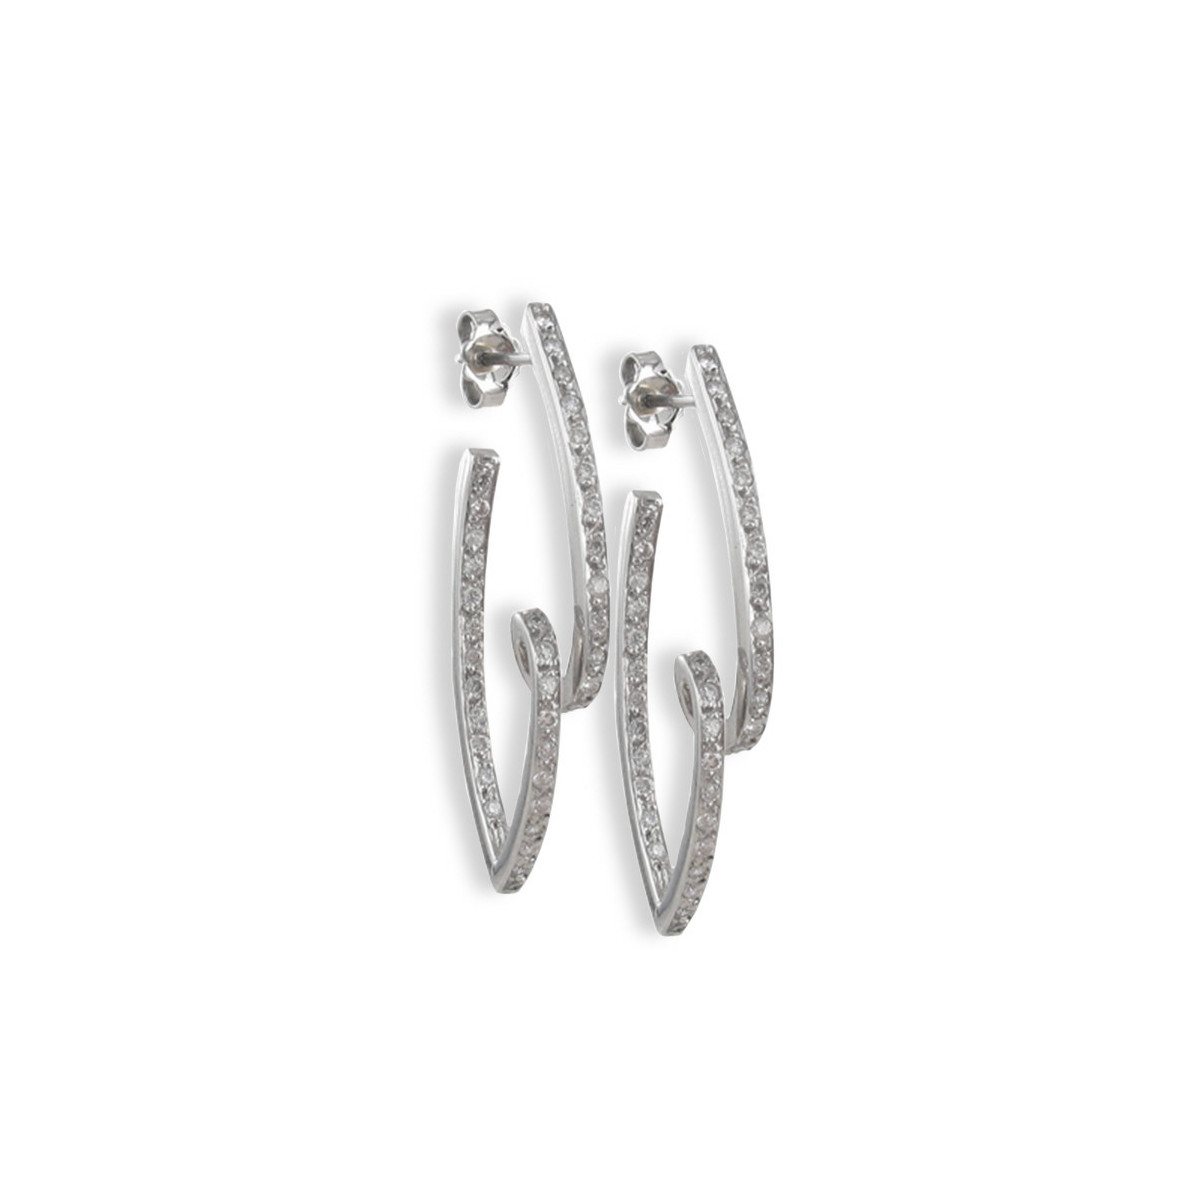 WHITE GOLD AND DIAMONDS EARRINGS